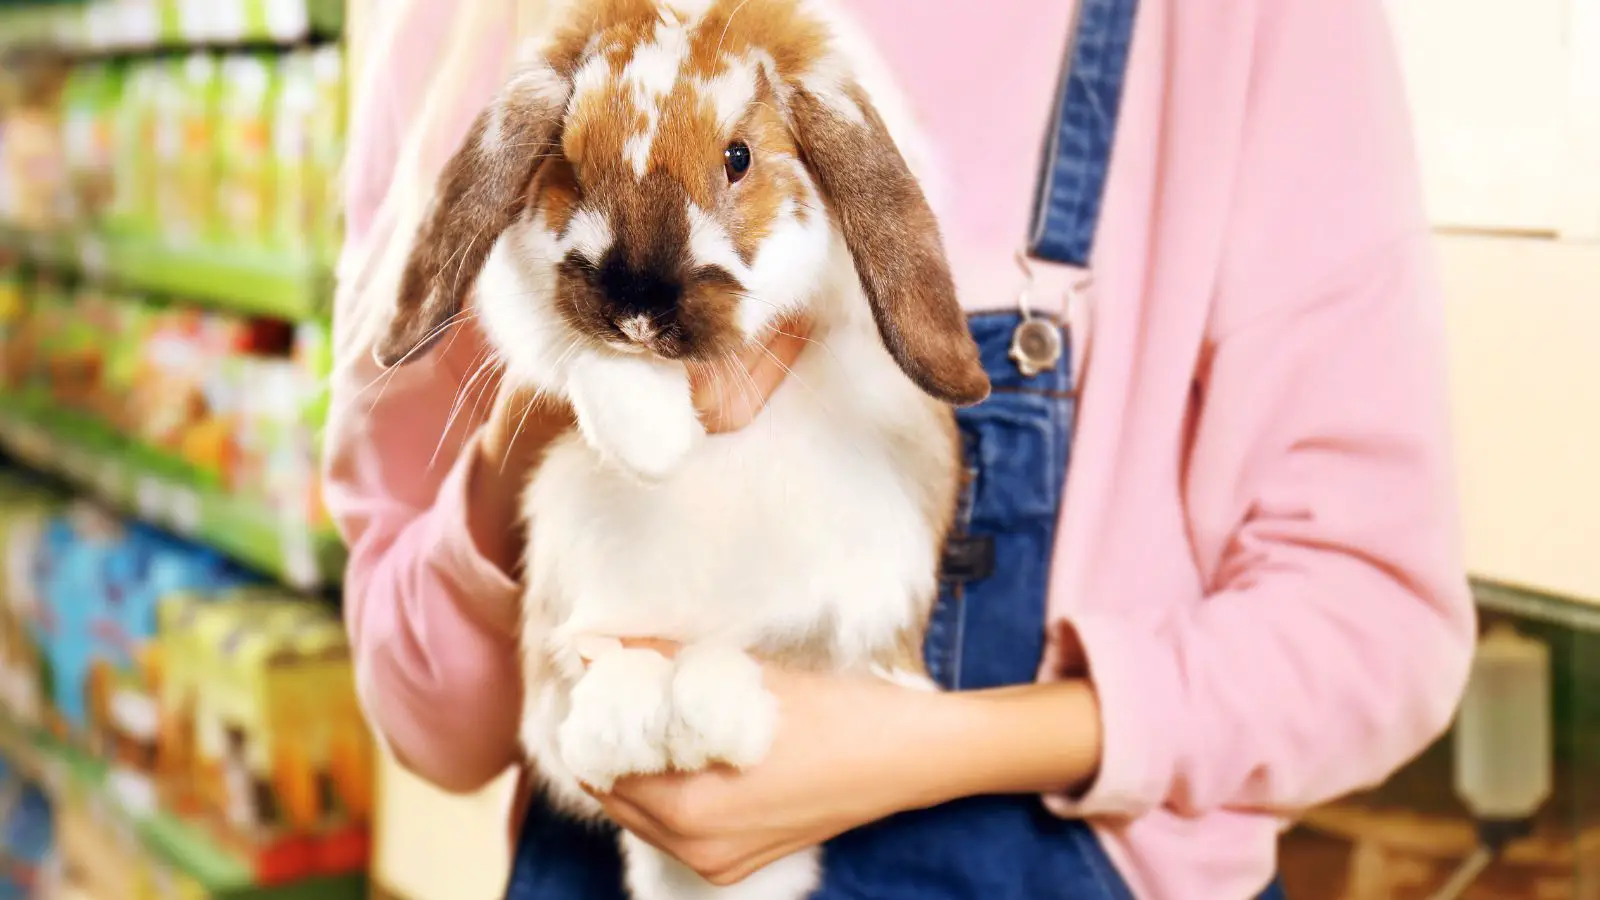 Person with a permit to own a rabbit - abouteverythingpets.com